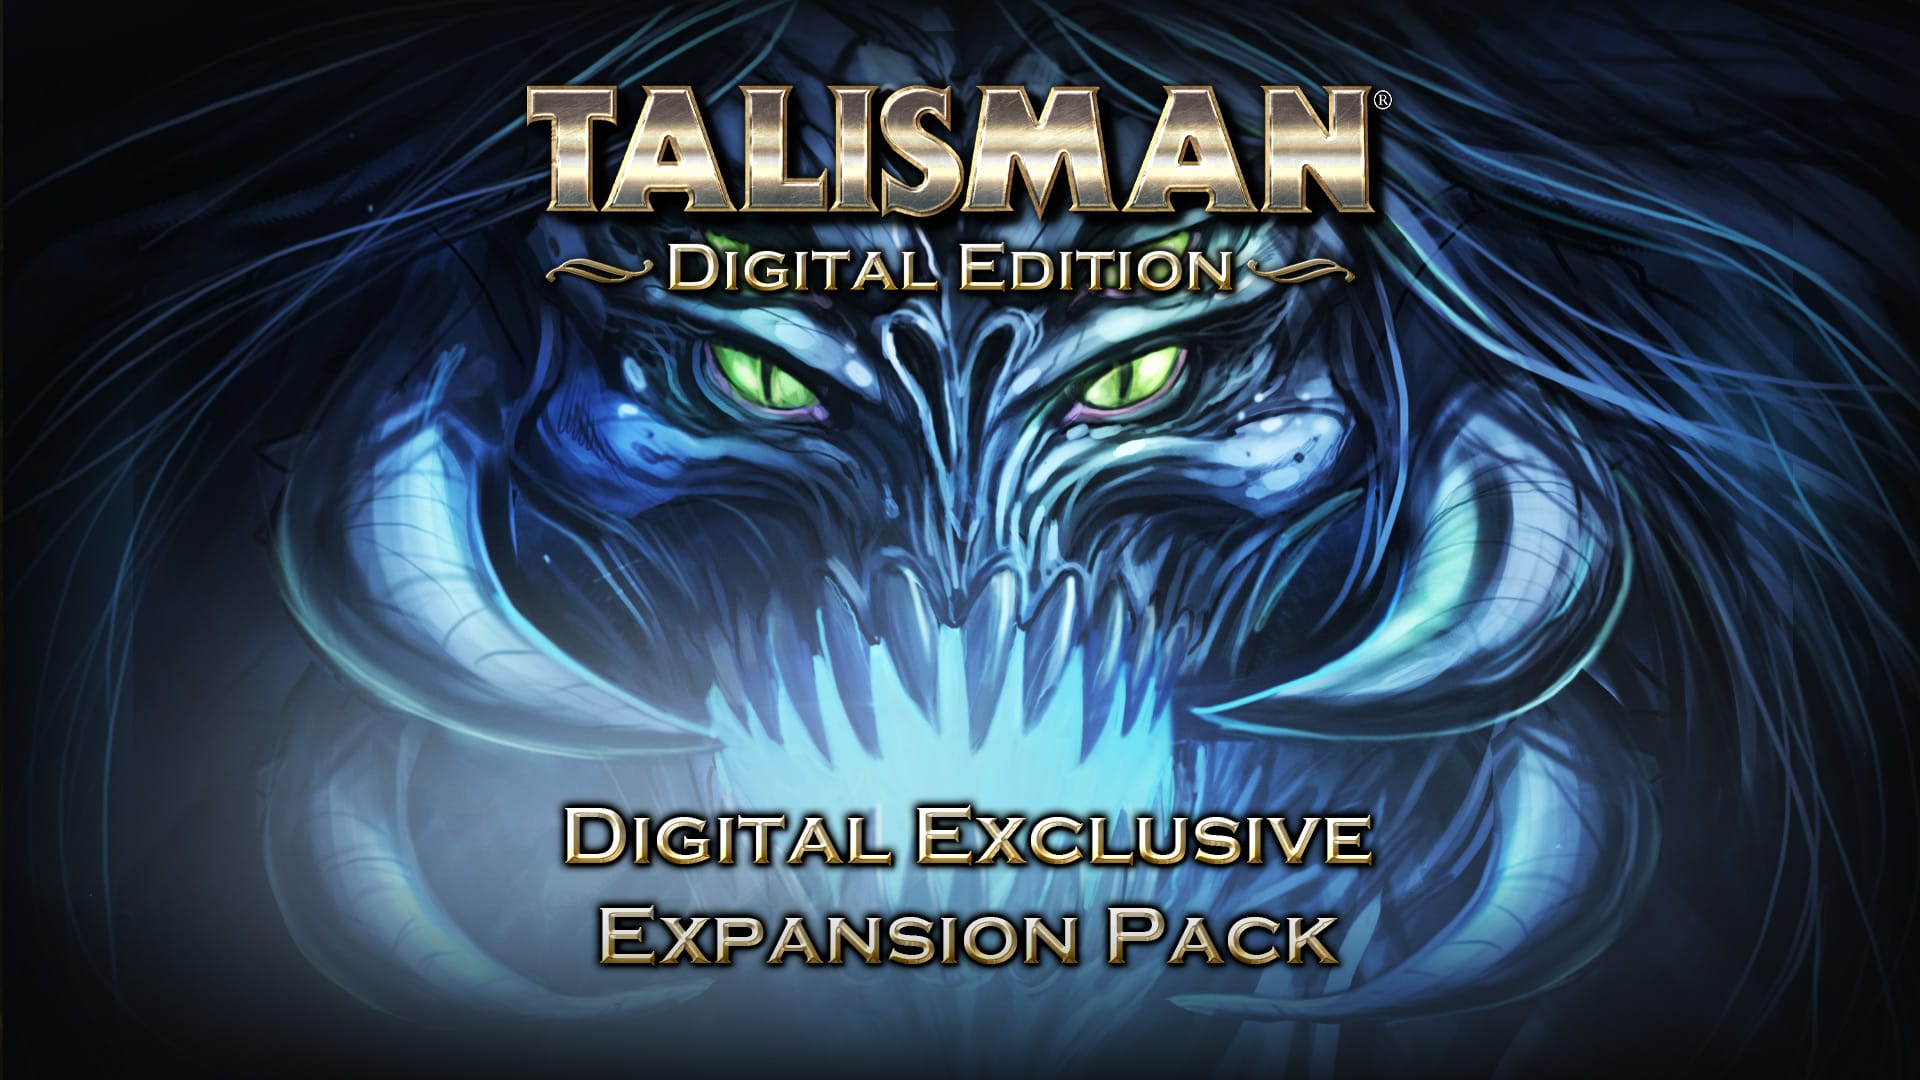 Digital Exclusive Expansion Pack